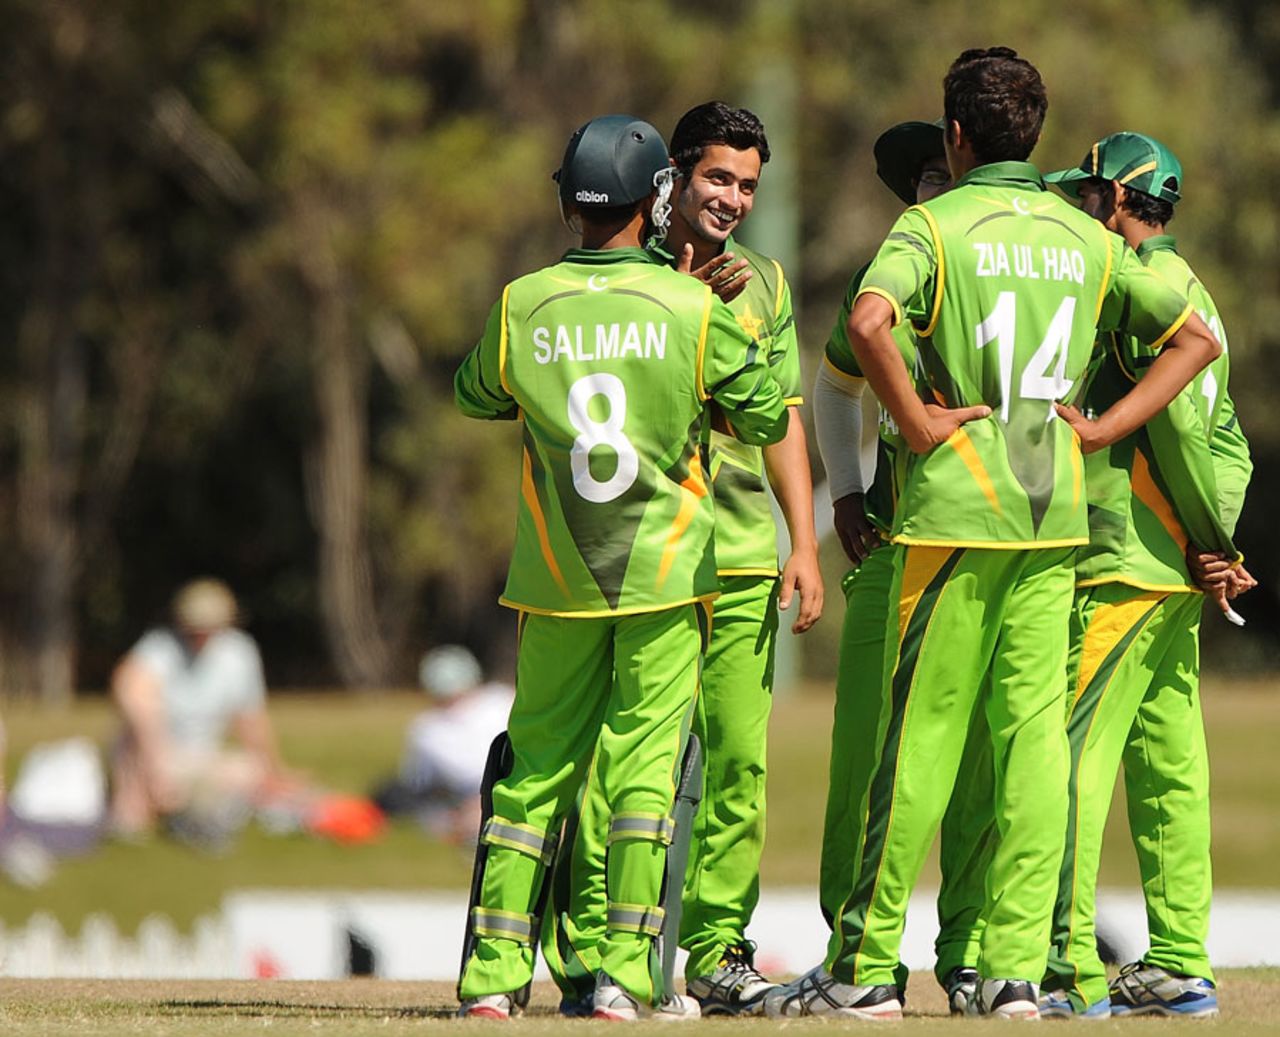 Pakistan limited New Zealand to 152, New Zealand v Pakistan, Group B, ICC Under-19 World Cup 2012, Buderim, August 16, 2012